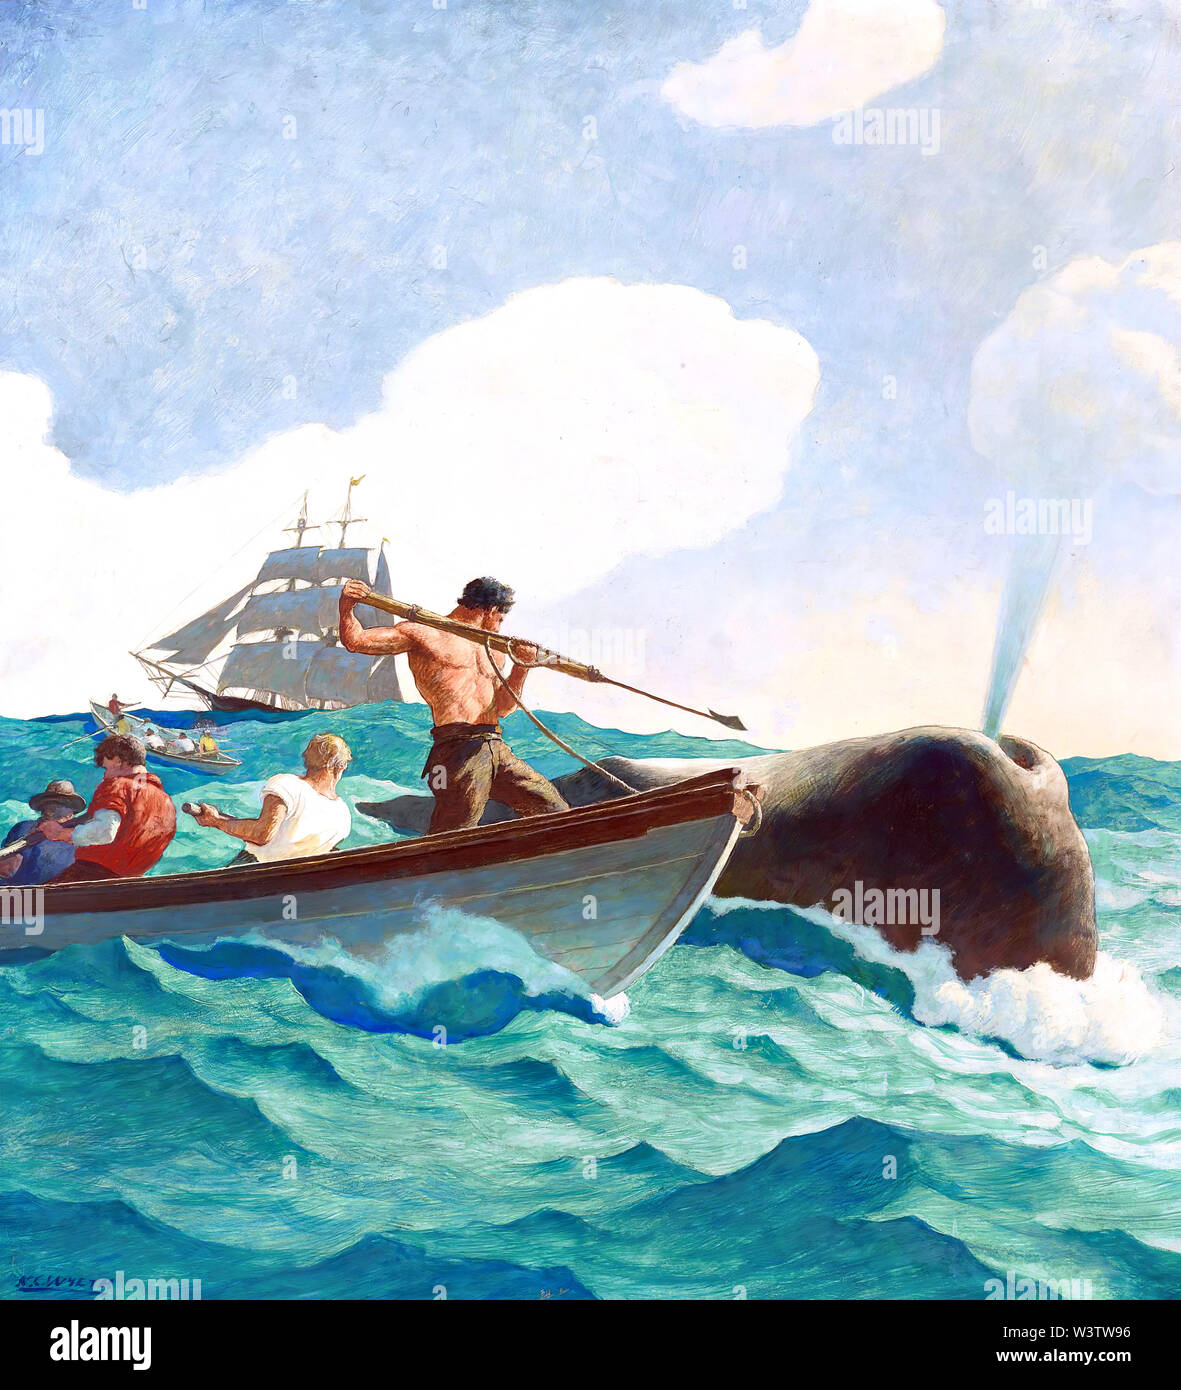 NC Wyeth The Story of Whaling Stock Photo